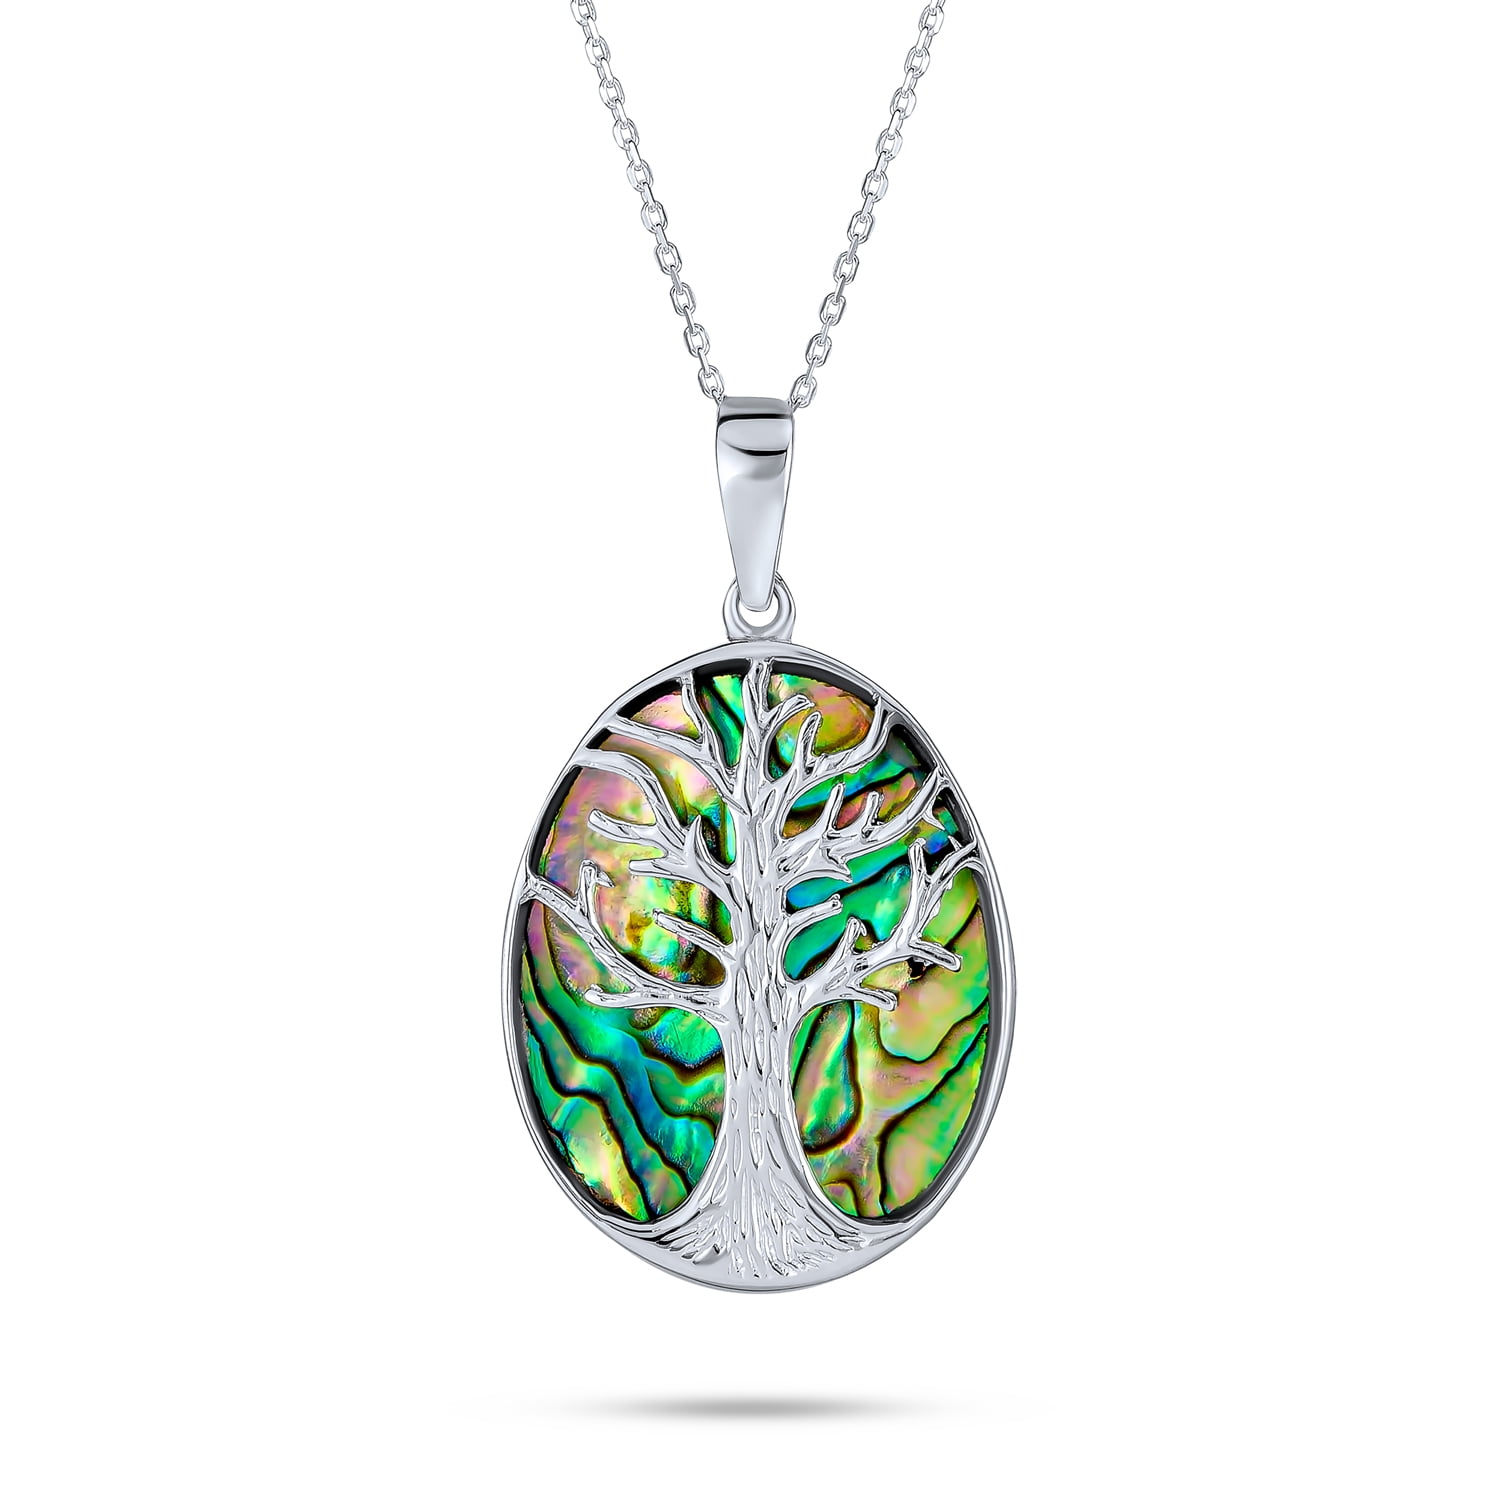 Abalone Shell & Mixed 20 pcs Wholesale Lots 925 Sterling Silver Plated Pendant 